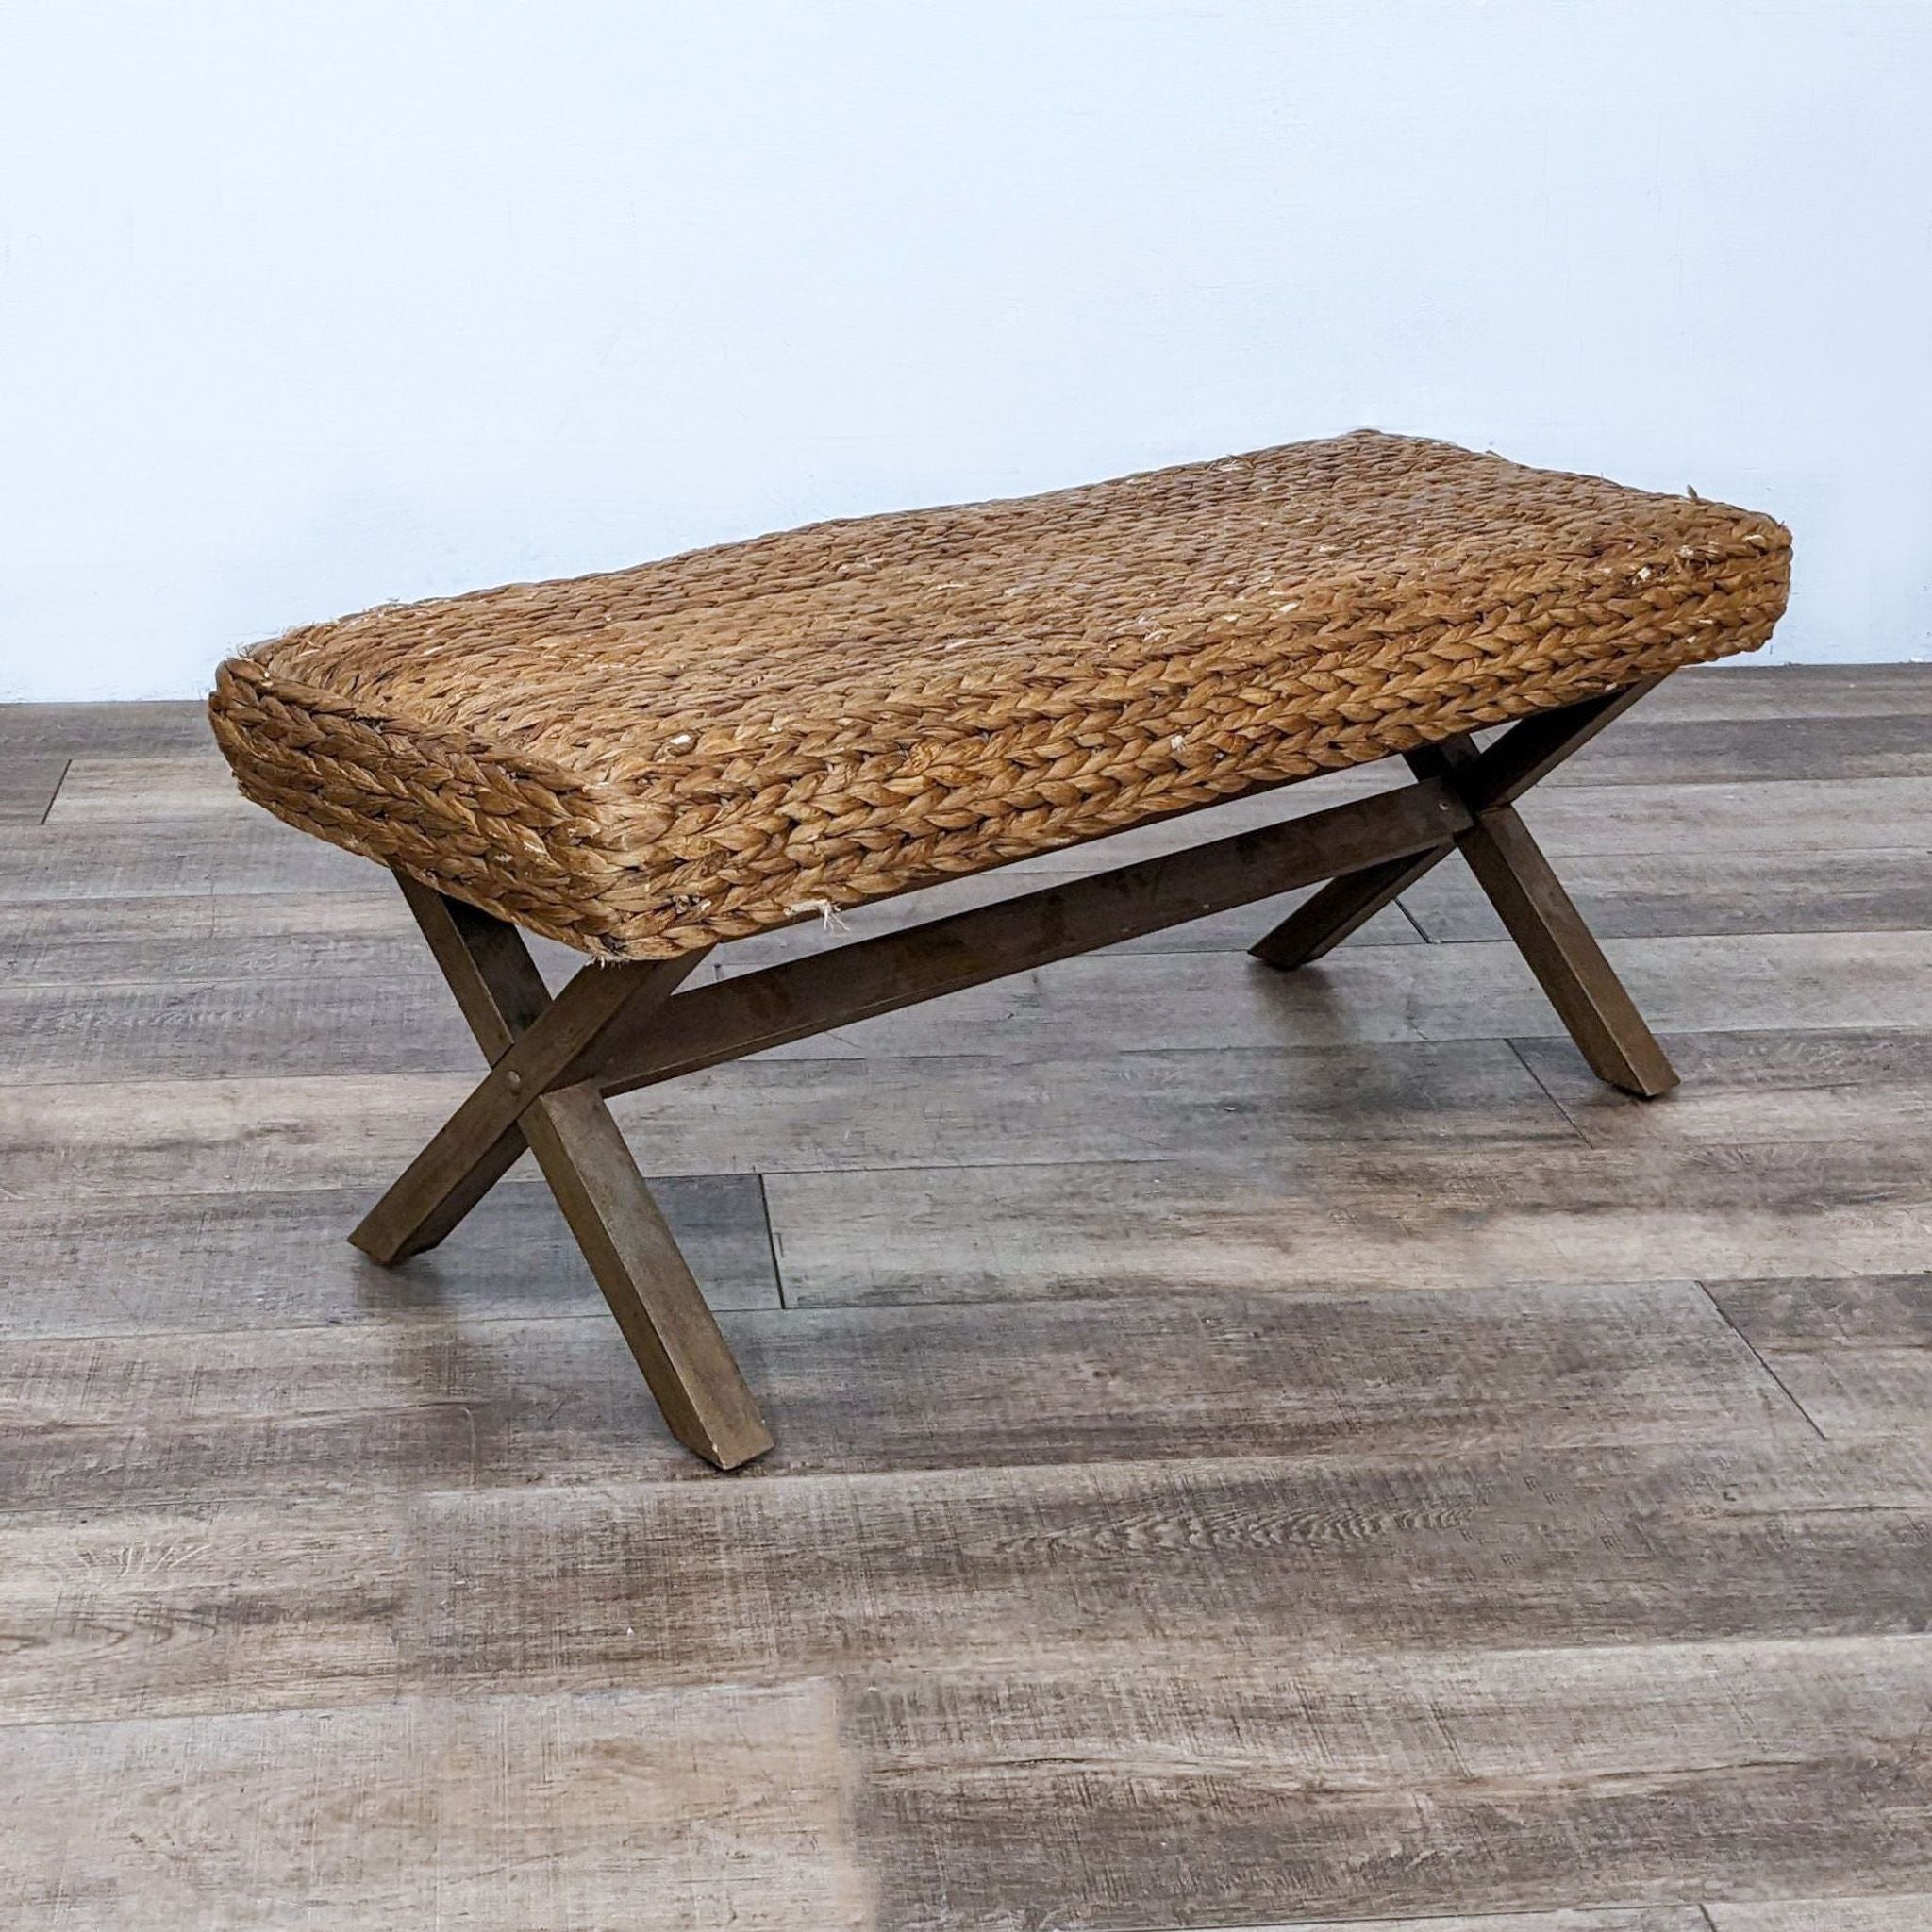 Alt text 2: Reperch's sturdy bench featuring a crisscross wooden base and woven reed top, placed against a neutral wall on a wood-patterned floor.